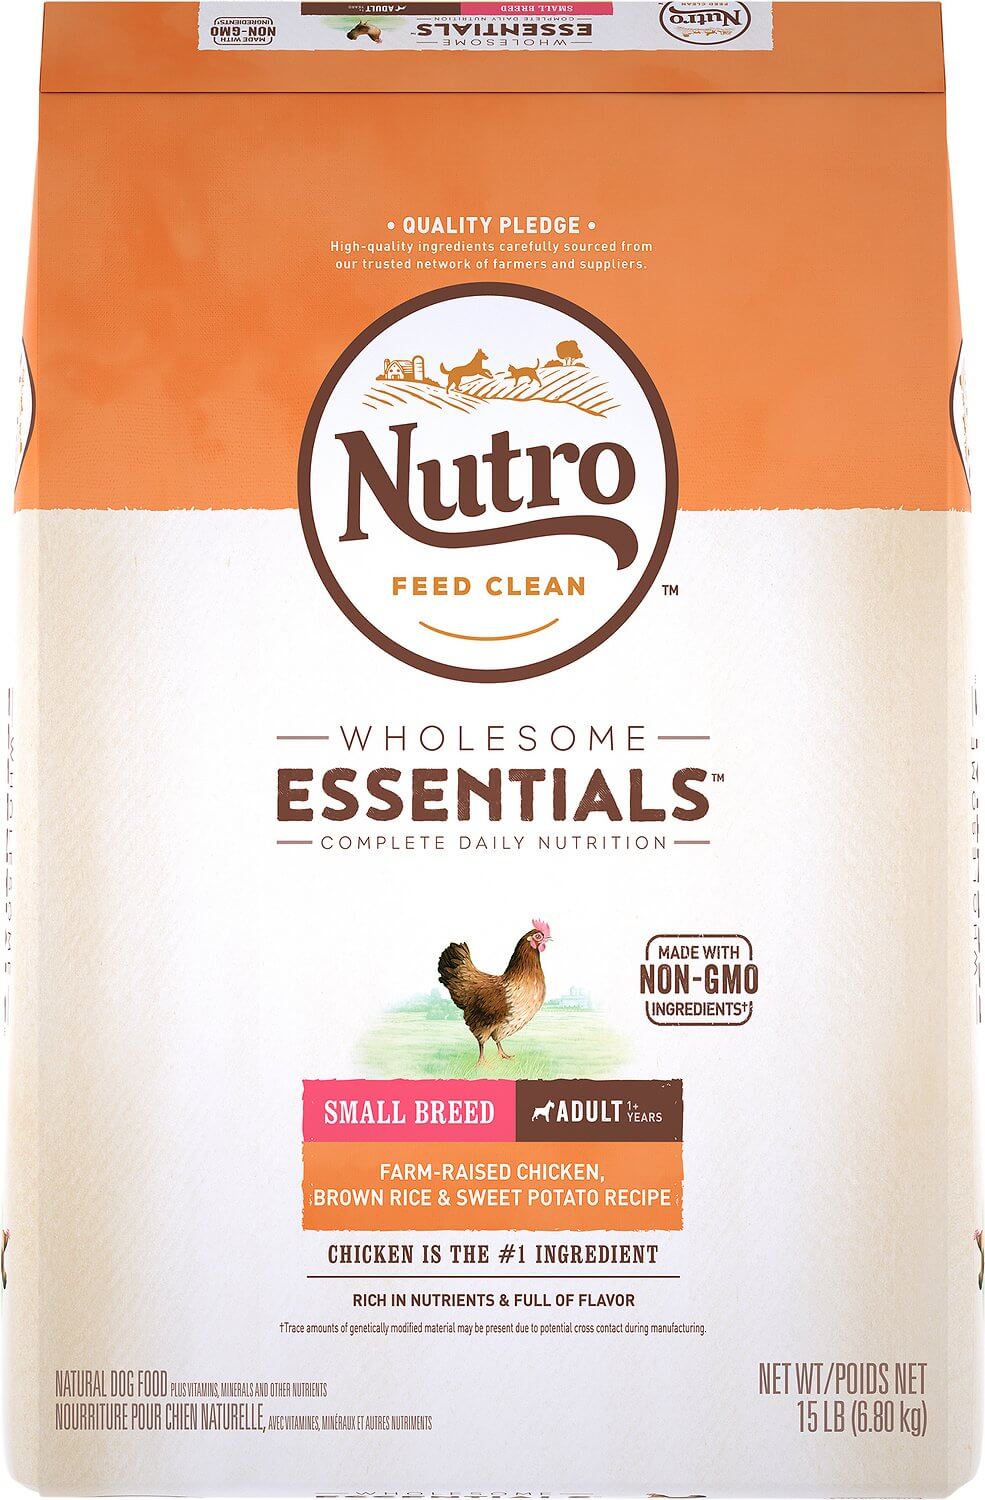 Nutro Dog Food Review 2020 | Ratings 